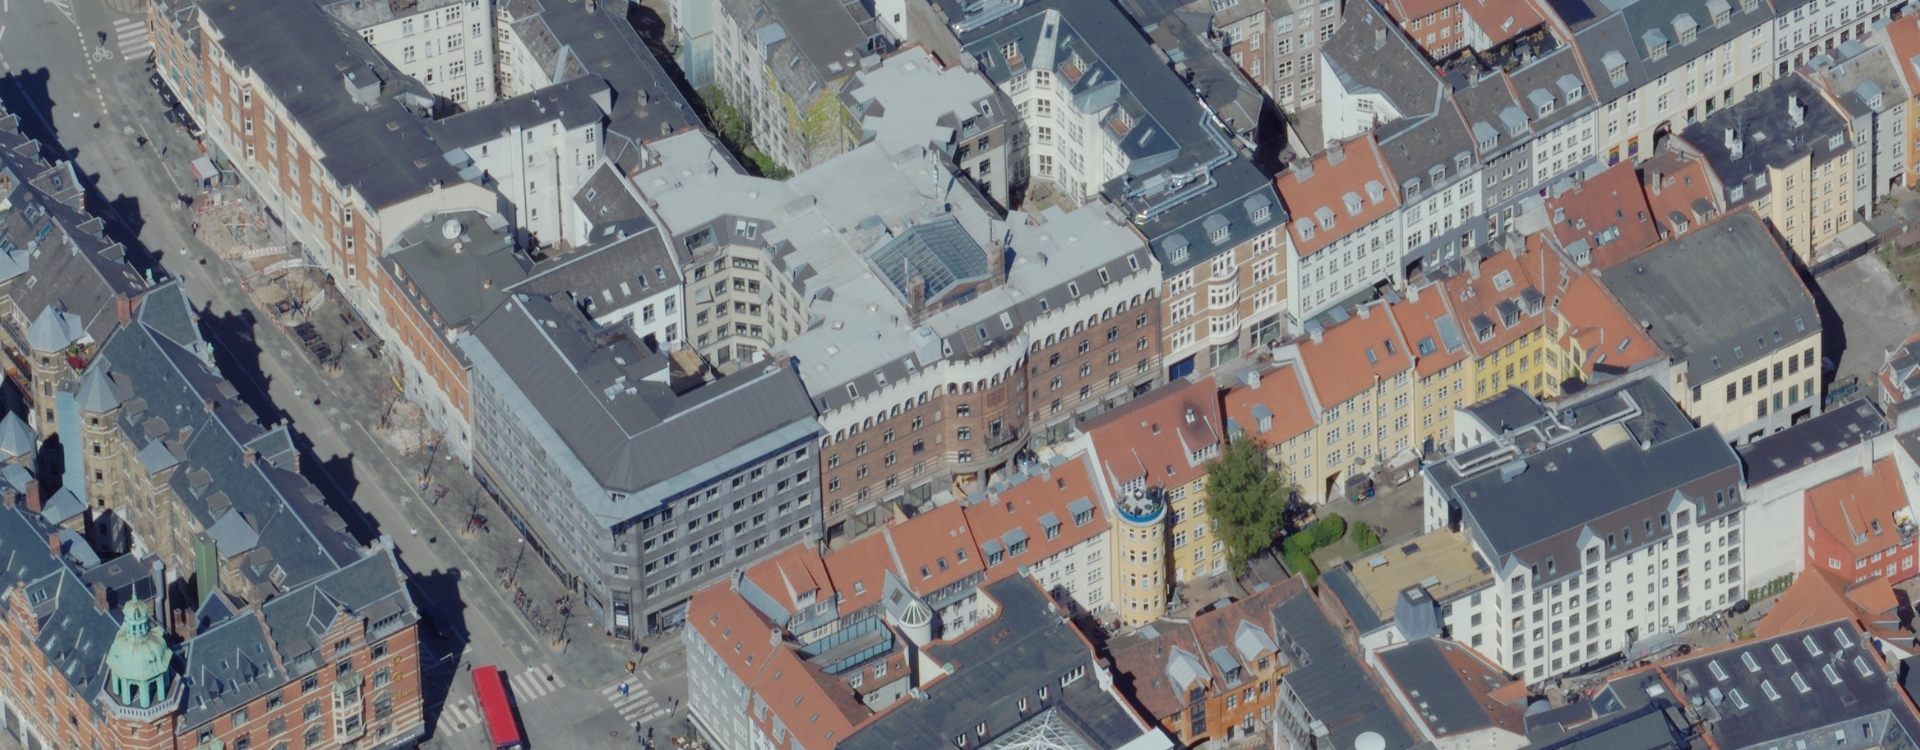 Grundtvigs Hus aerial view